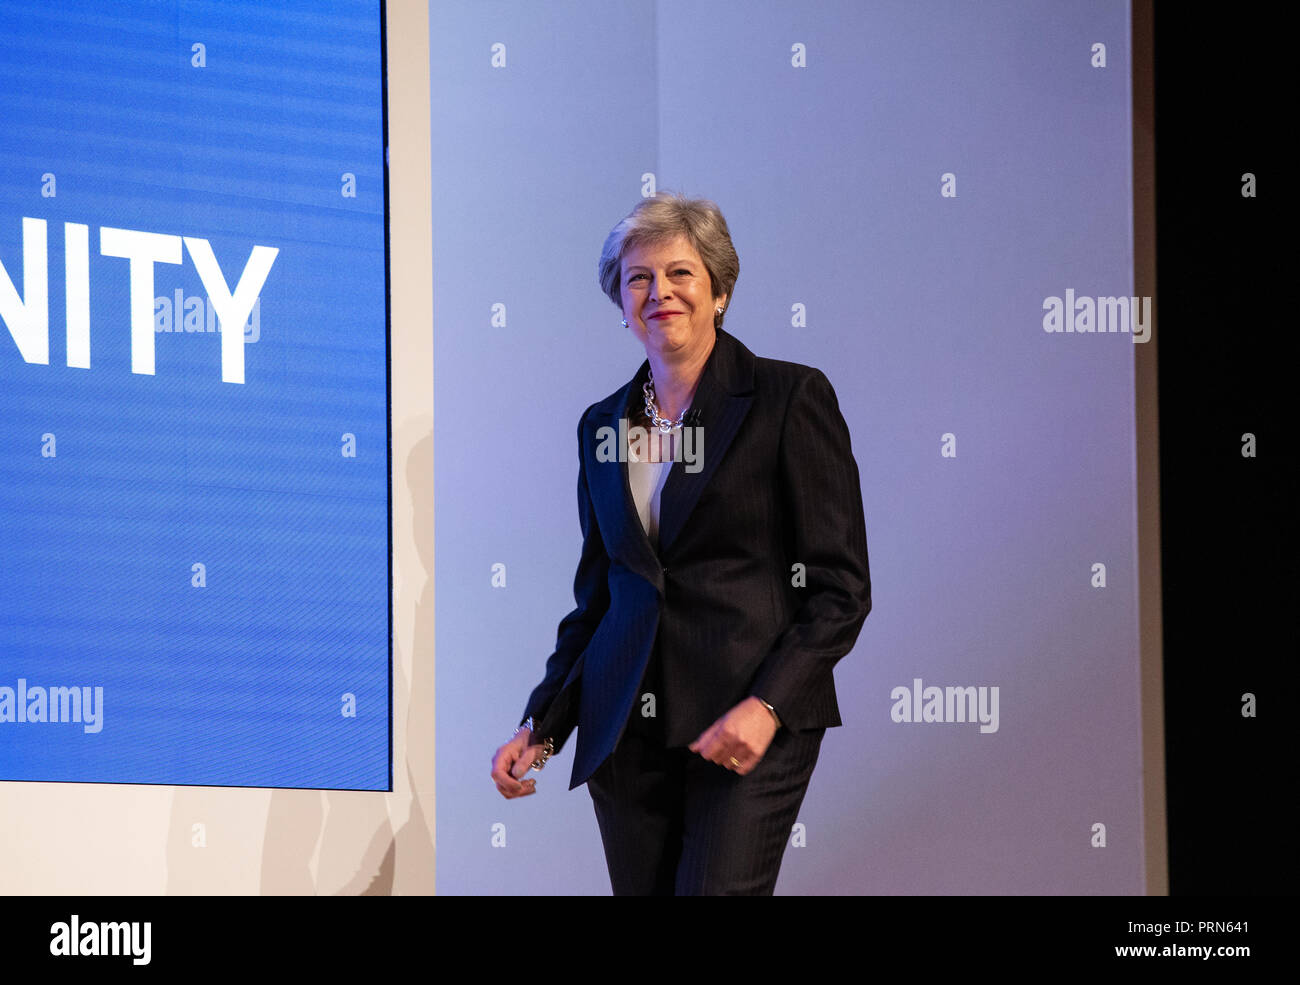 Birmingham, UK. 3rd Oct 2018. Theresa May walks on stage to the tune of 'Dancing Queen' by Abba and starts dancing before she delivers her Leaders' speech to the Conservative Party Conference in Birmingham. Credit: Mark Thomas/Alamy Live News Stock Photo